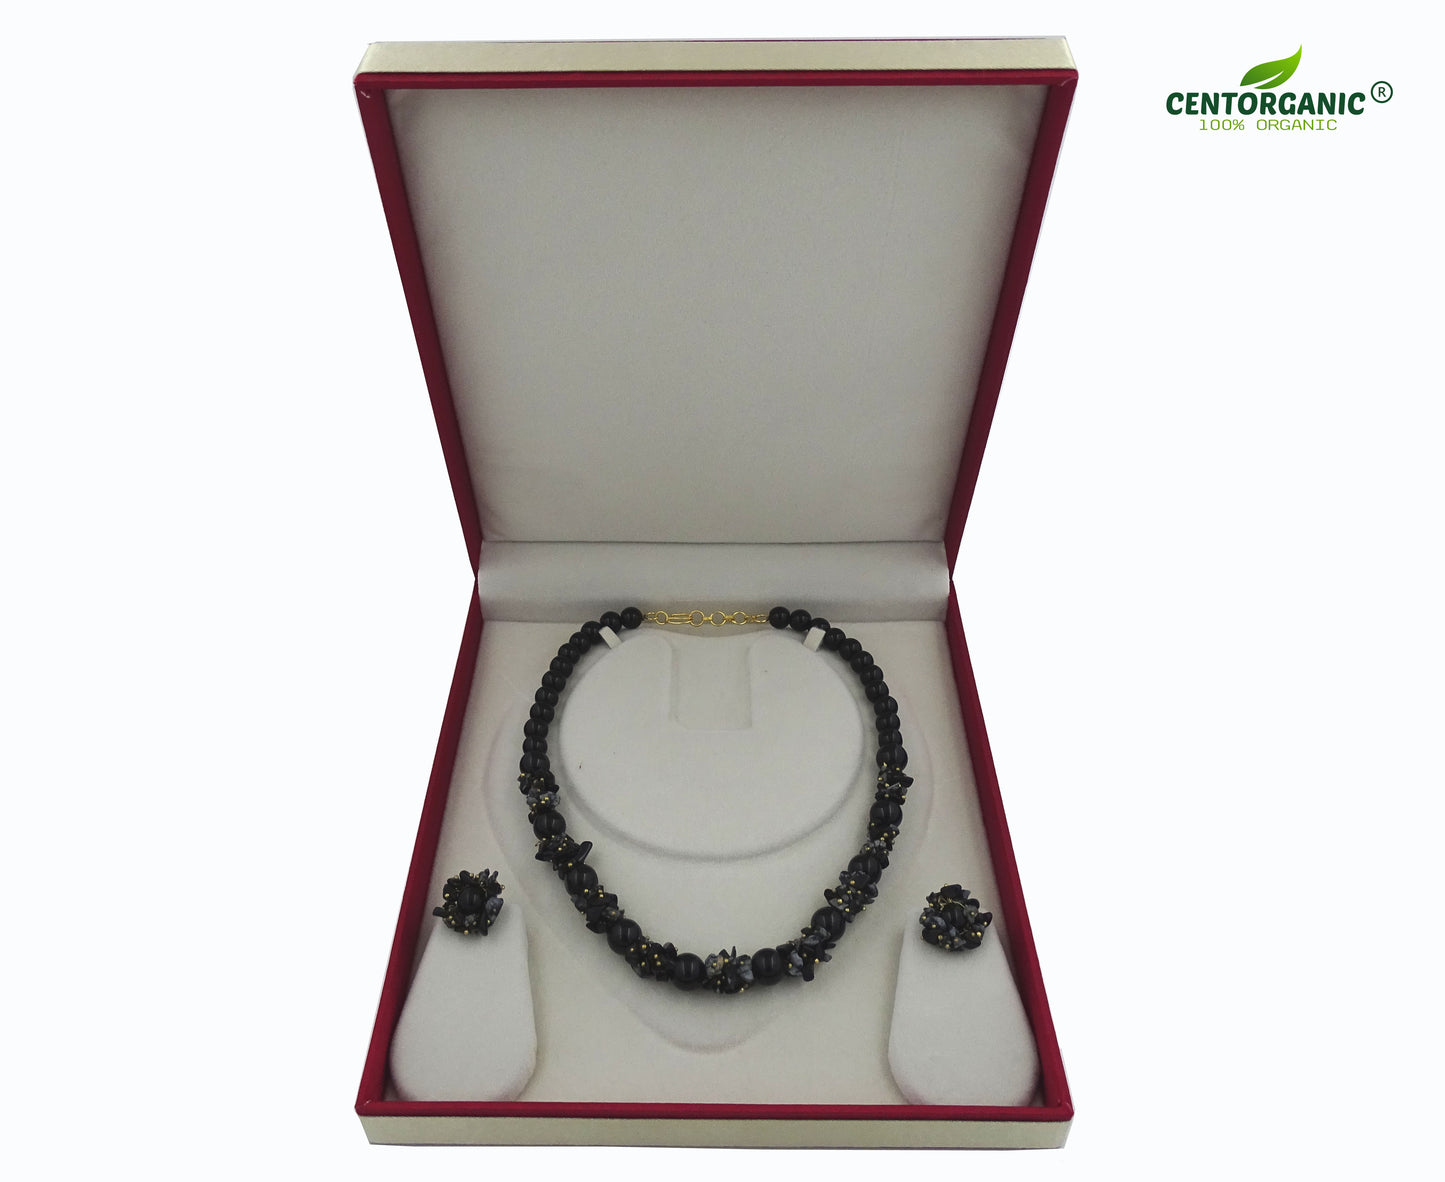 Centorganic - Semi Precious Gemstone Crystal Beads Necklace with Earring, Black Obsidian Stone chip and round bead of 10mm and 8mm 16" Mala for Girl and Women Fashion Jewellery, with beautiful jewellery box for gifting.